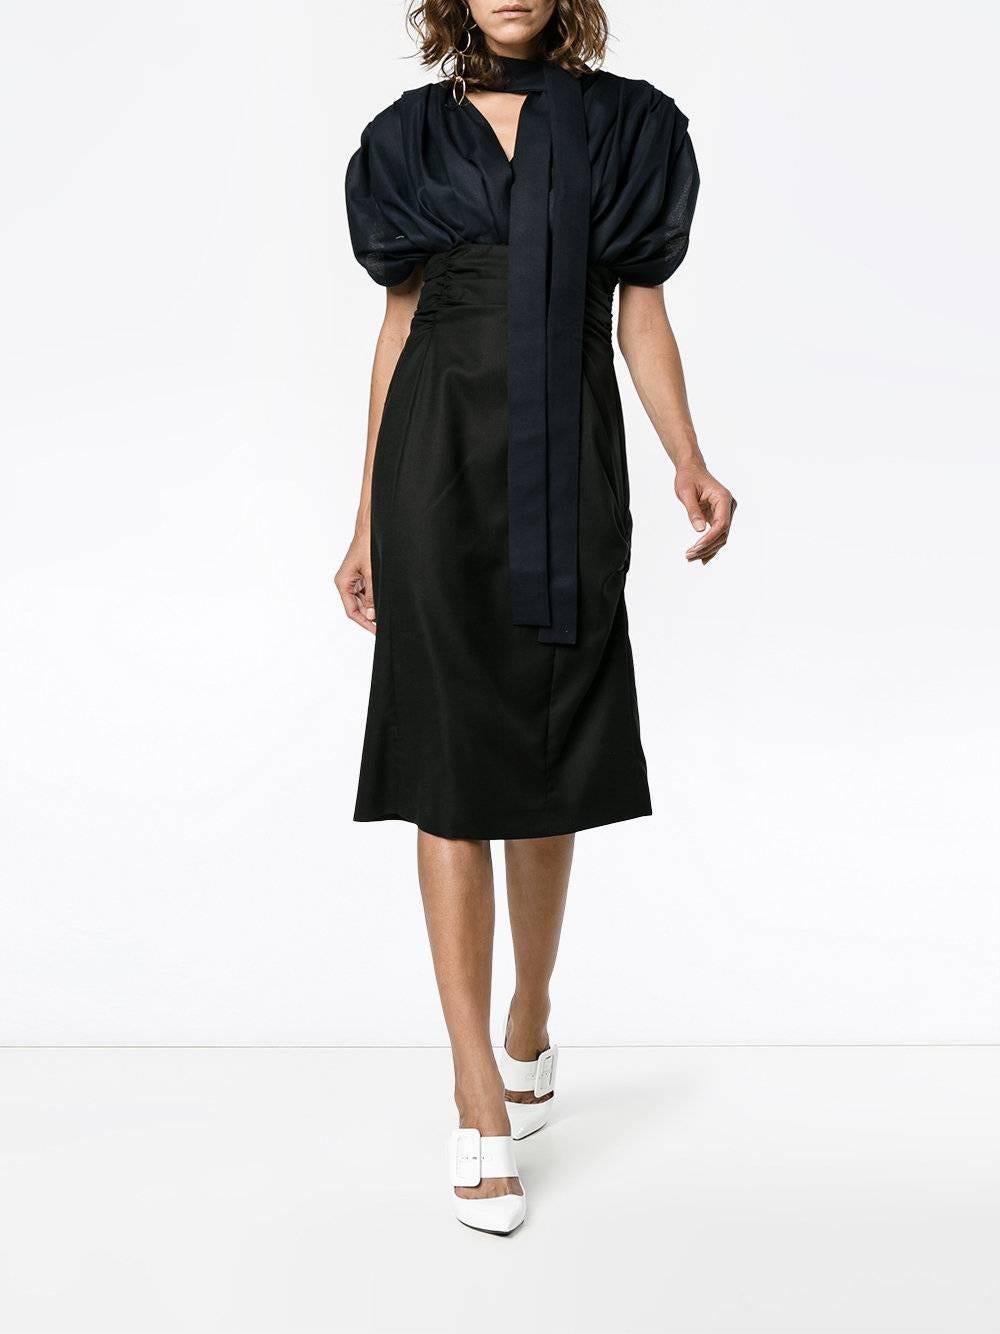 Jacquemus Black & Navy Wool La Robe Madame Midi Dress Sz FR38

Made In: Portugal
Color: Black, navy
Composition: 100% Wool
Lining: None
Closure/Opening: Side zip closure
Retail Price: $595 + tax
Overall Condition: Excellent pre-owned